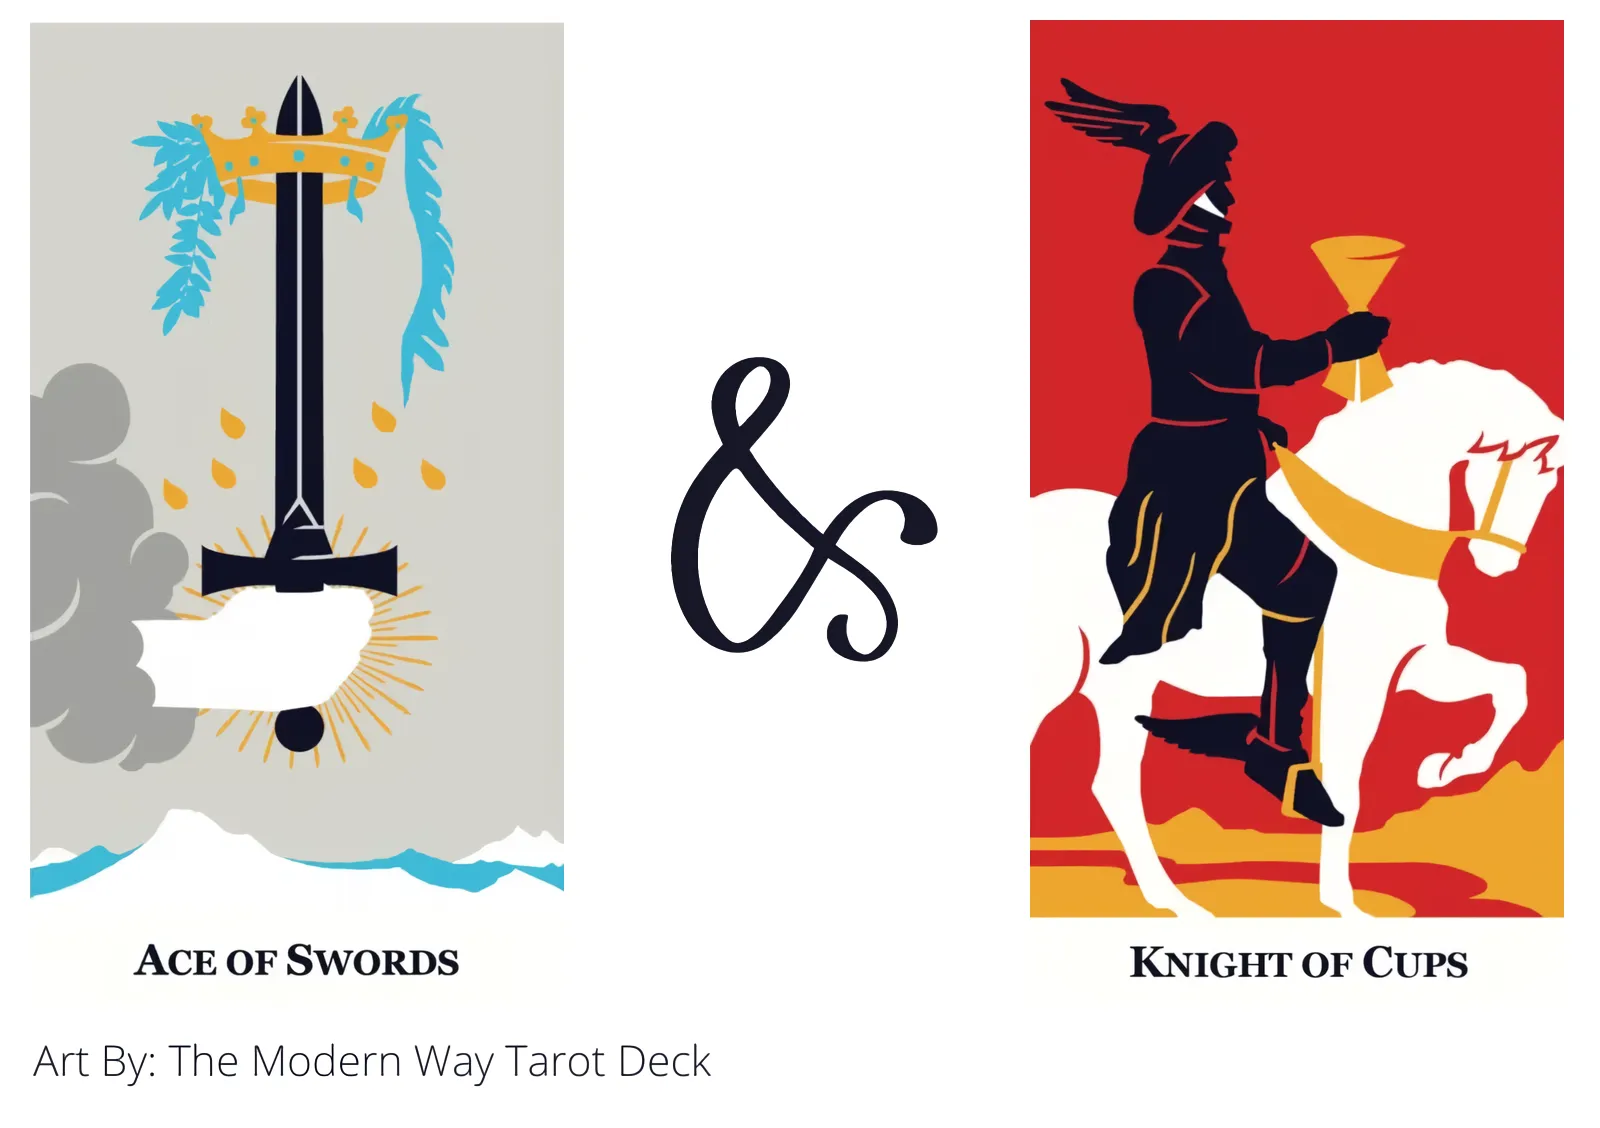 ace of swords and knight of cups tarot cards together